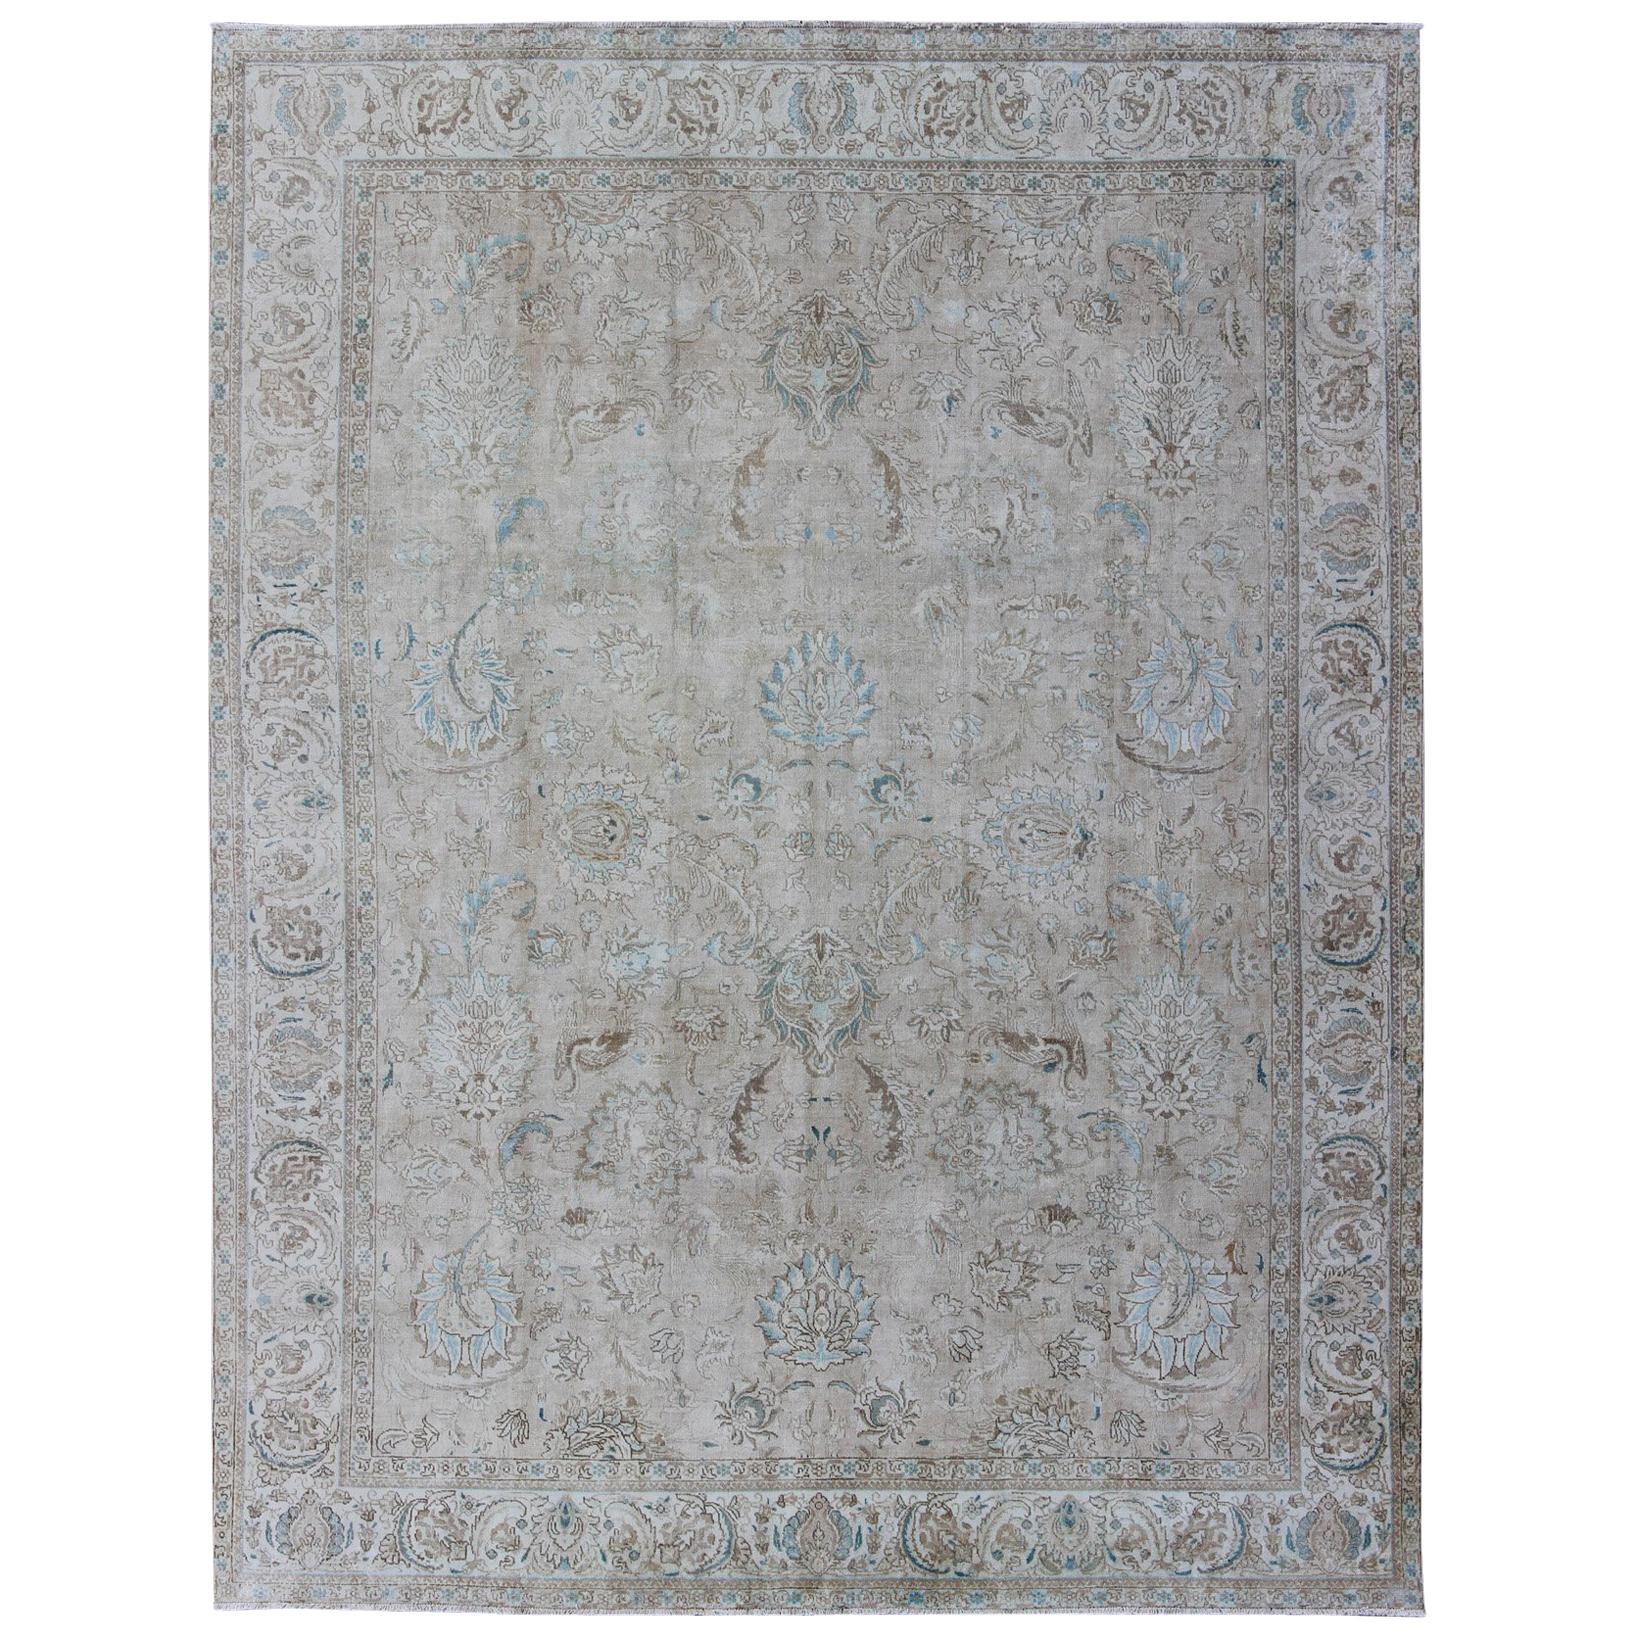 Muted Gray, Blue, and Ivory Vintage Persian Tabriz Rug with Floral Design